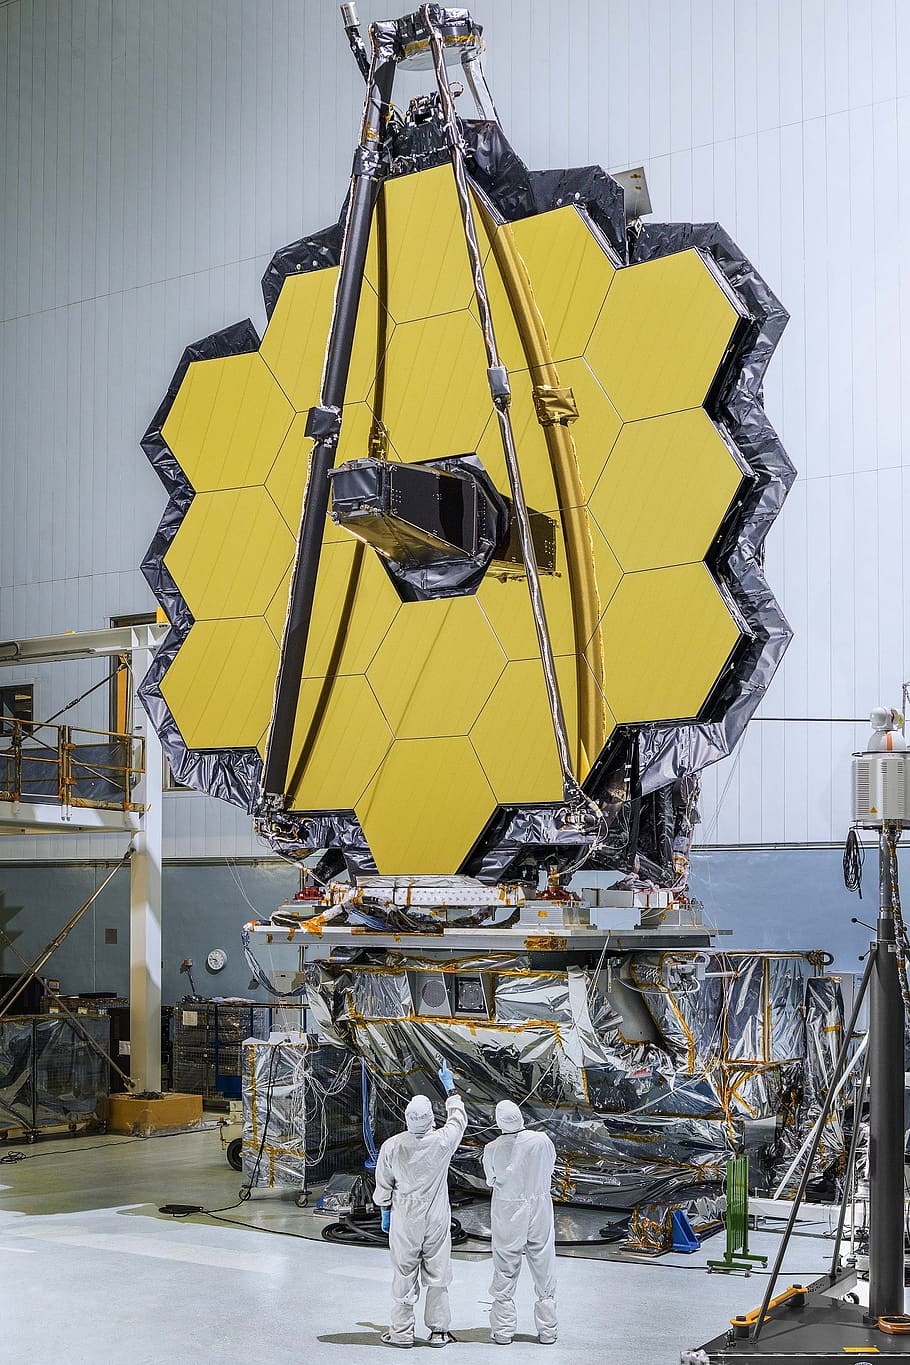 mirror, space telescope, hexagonal mirrors, science, technicians, cosmos, research, observatory, instrument, tool